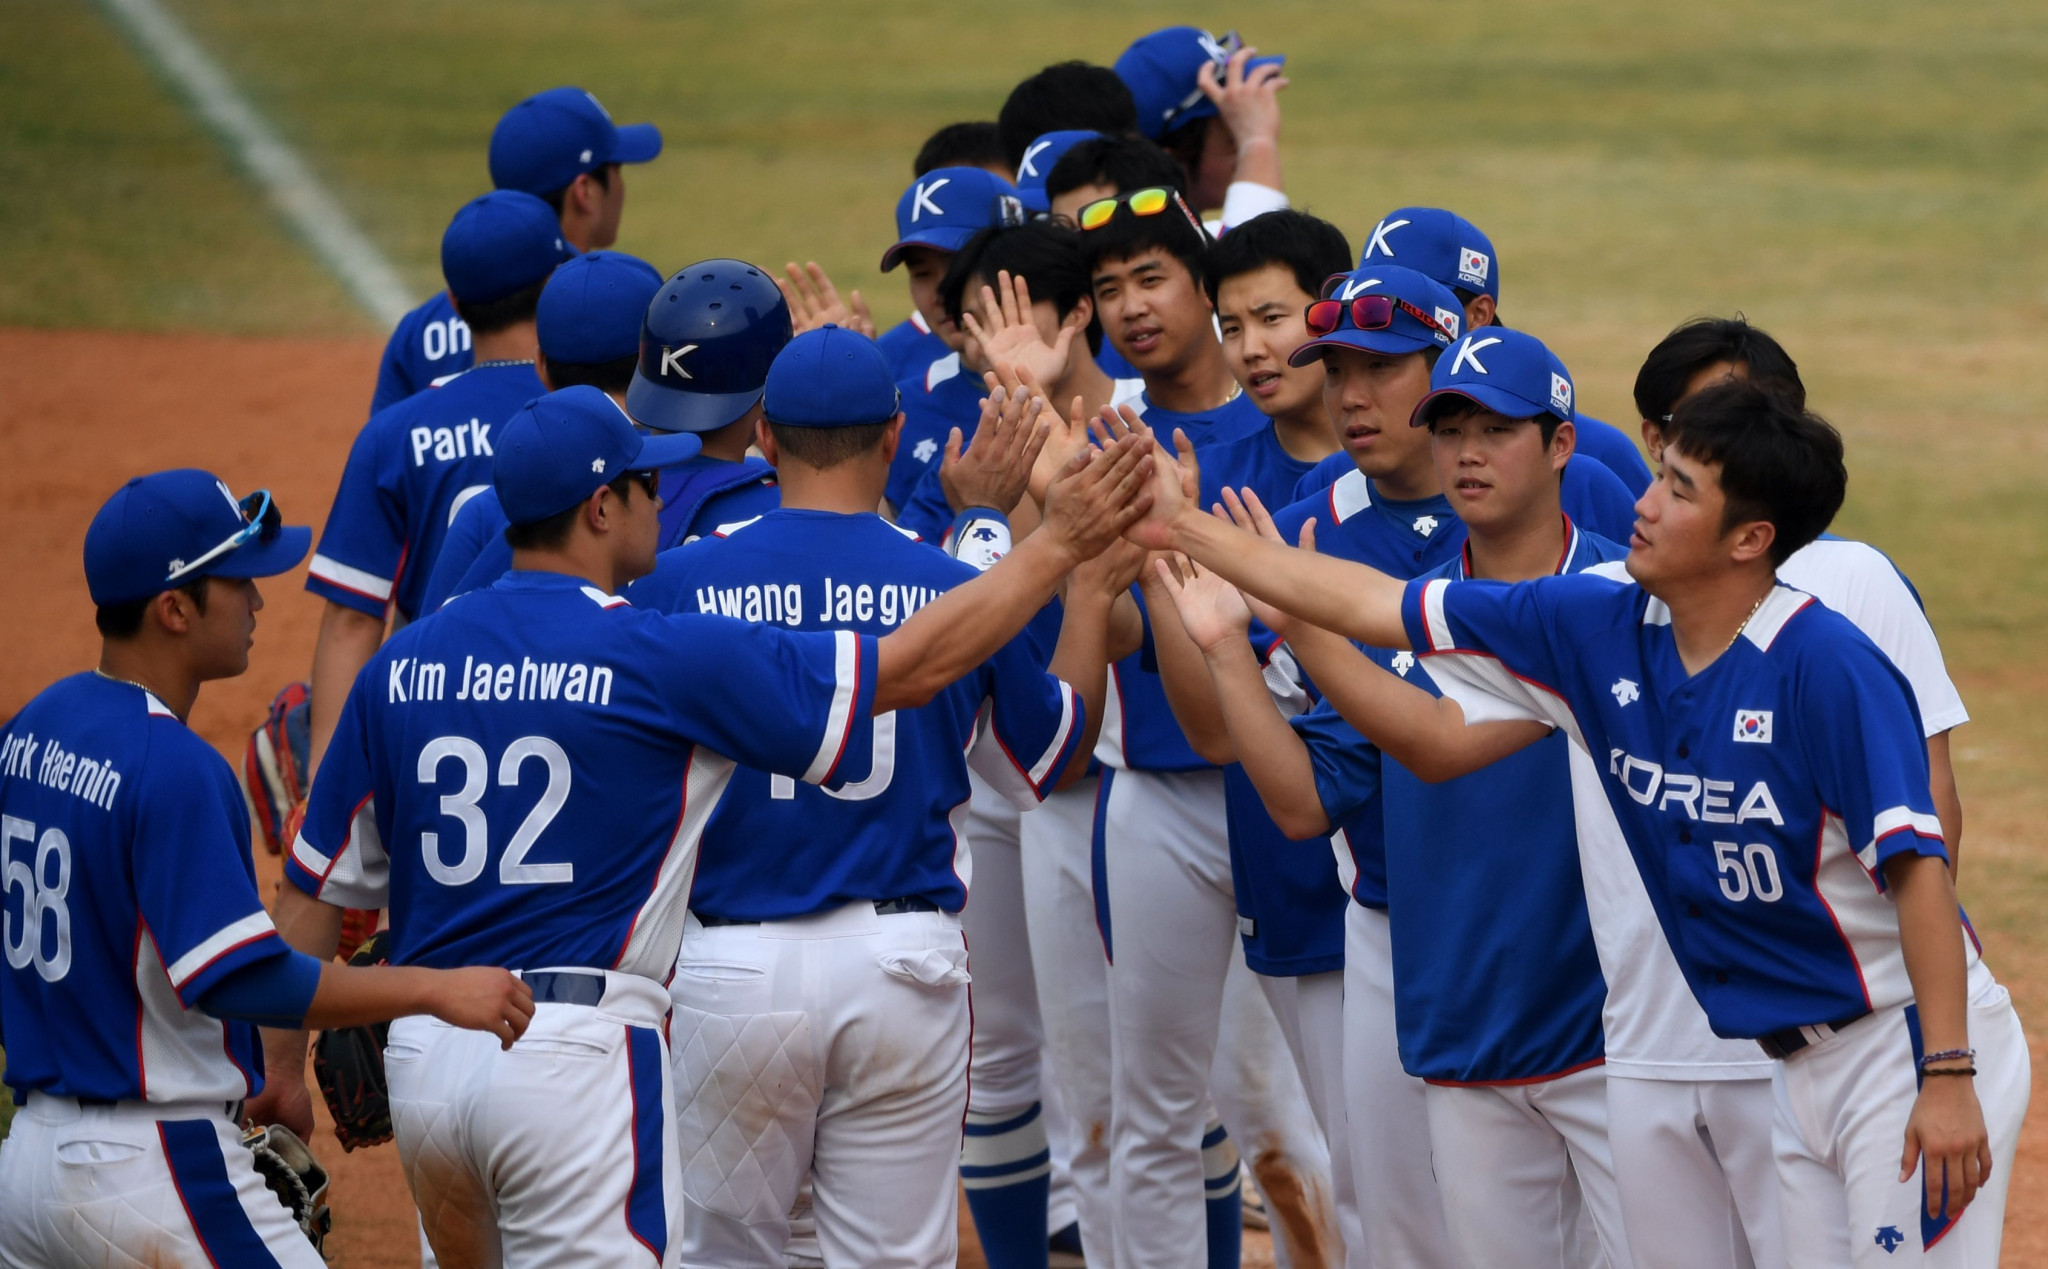 South Korea is seeking a fourth consecutive Asian Games baseball gold medal in Hangzhou ©Getty Images